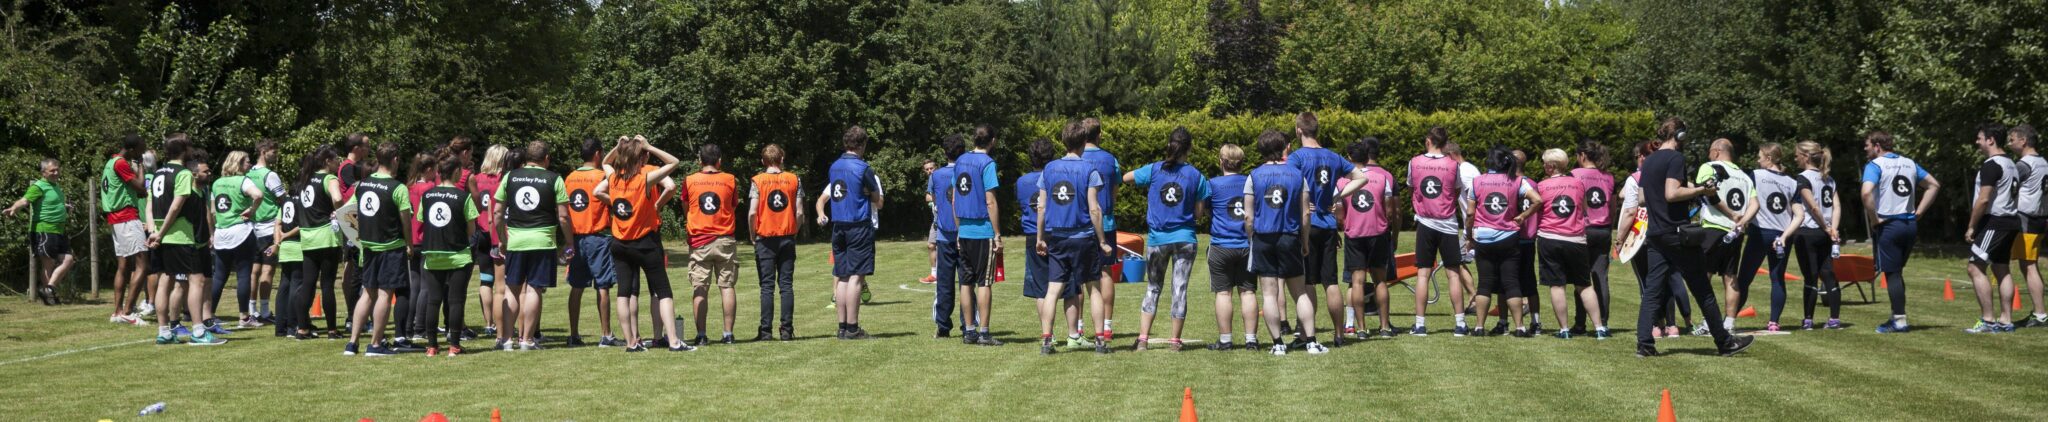 Croxley Park Sports Day | Teams in Coloured Sports Bibs